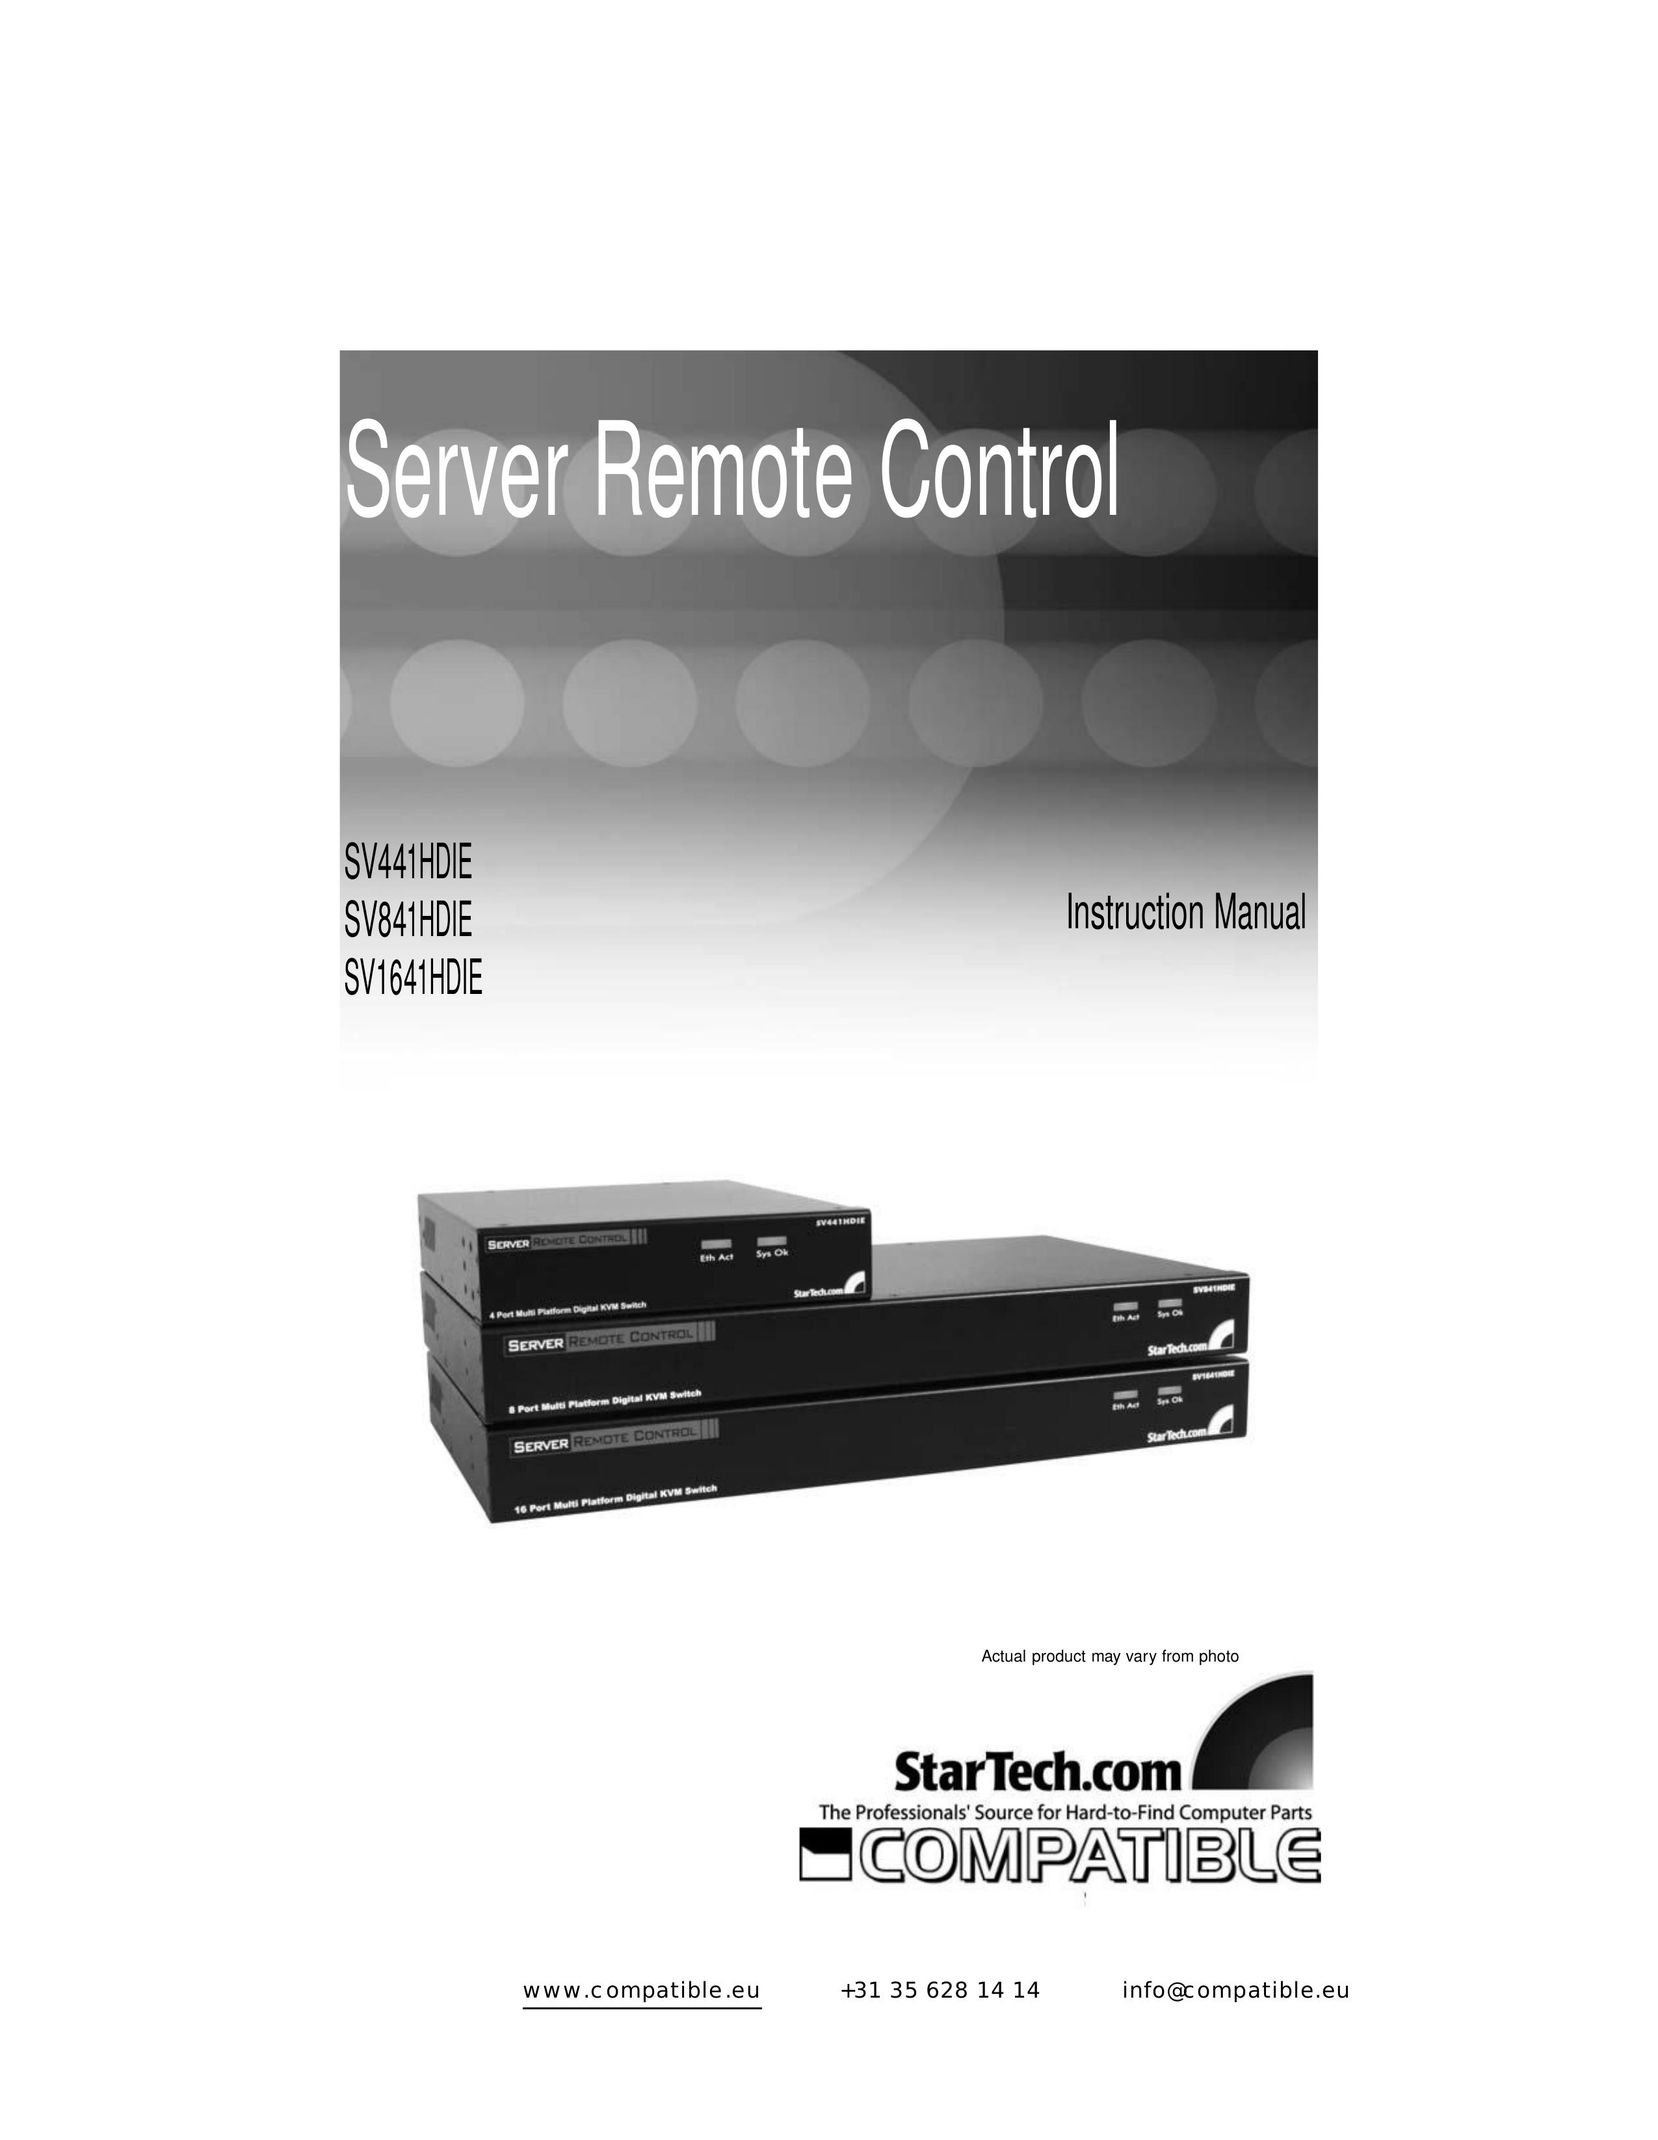 StarTech.com SV1641HDIE Universal Remote User Manual